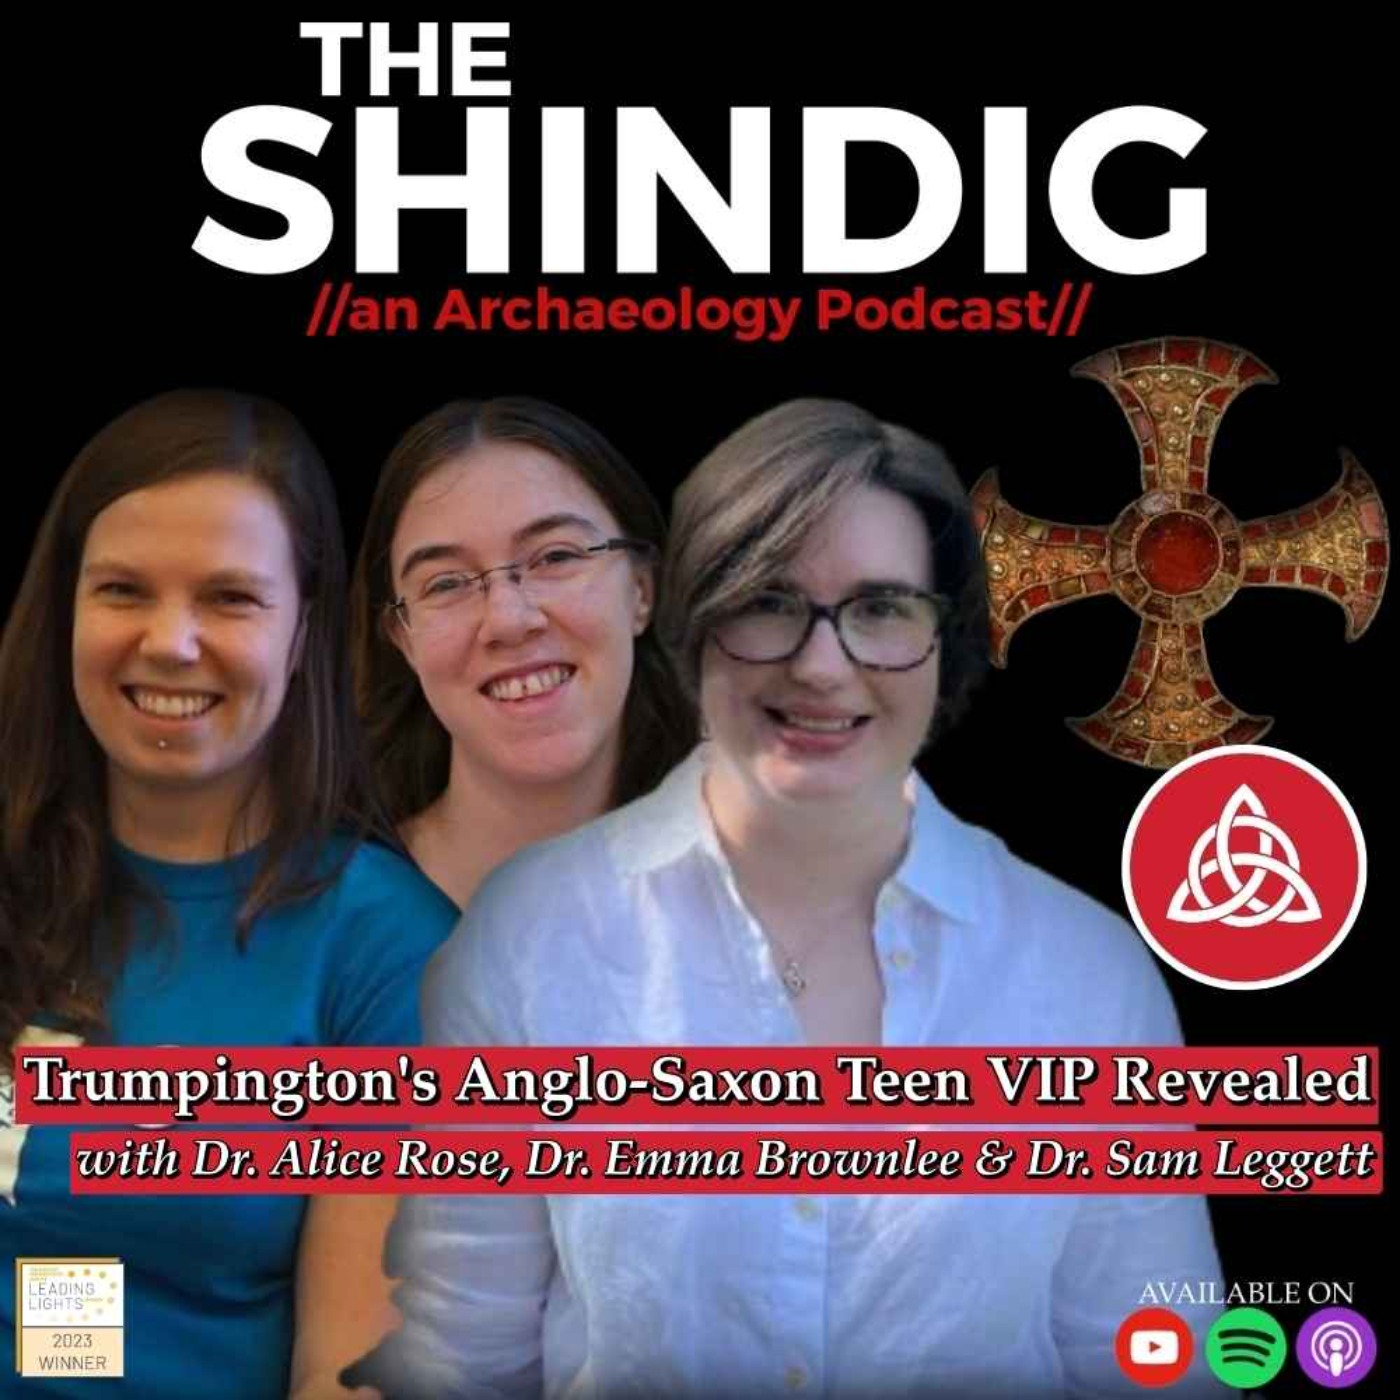 Trumpington's Anglo-Saxon Teen VIP Revealed - With Dr. Alice Rose, Dr. Emma Brownlee & Dr. Sam Leggett